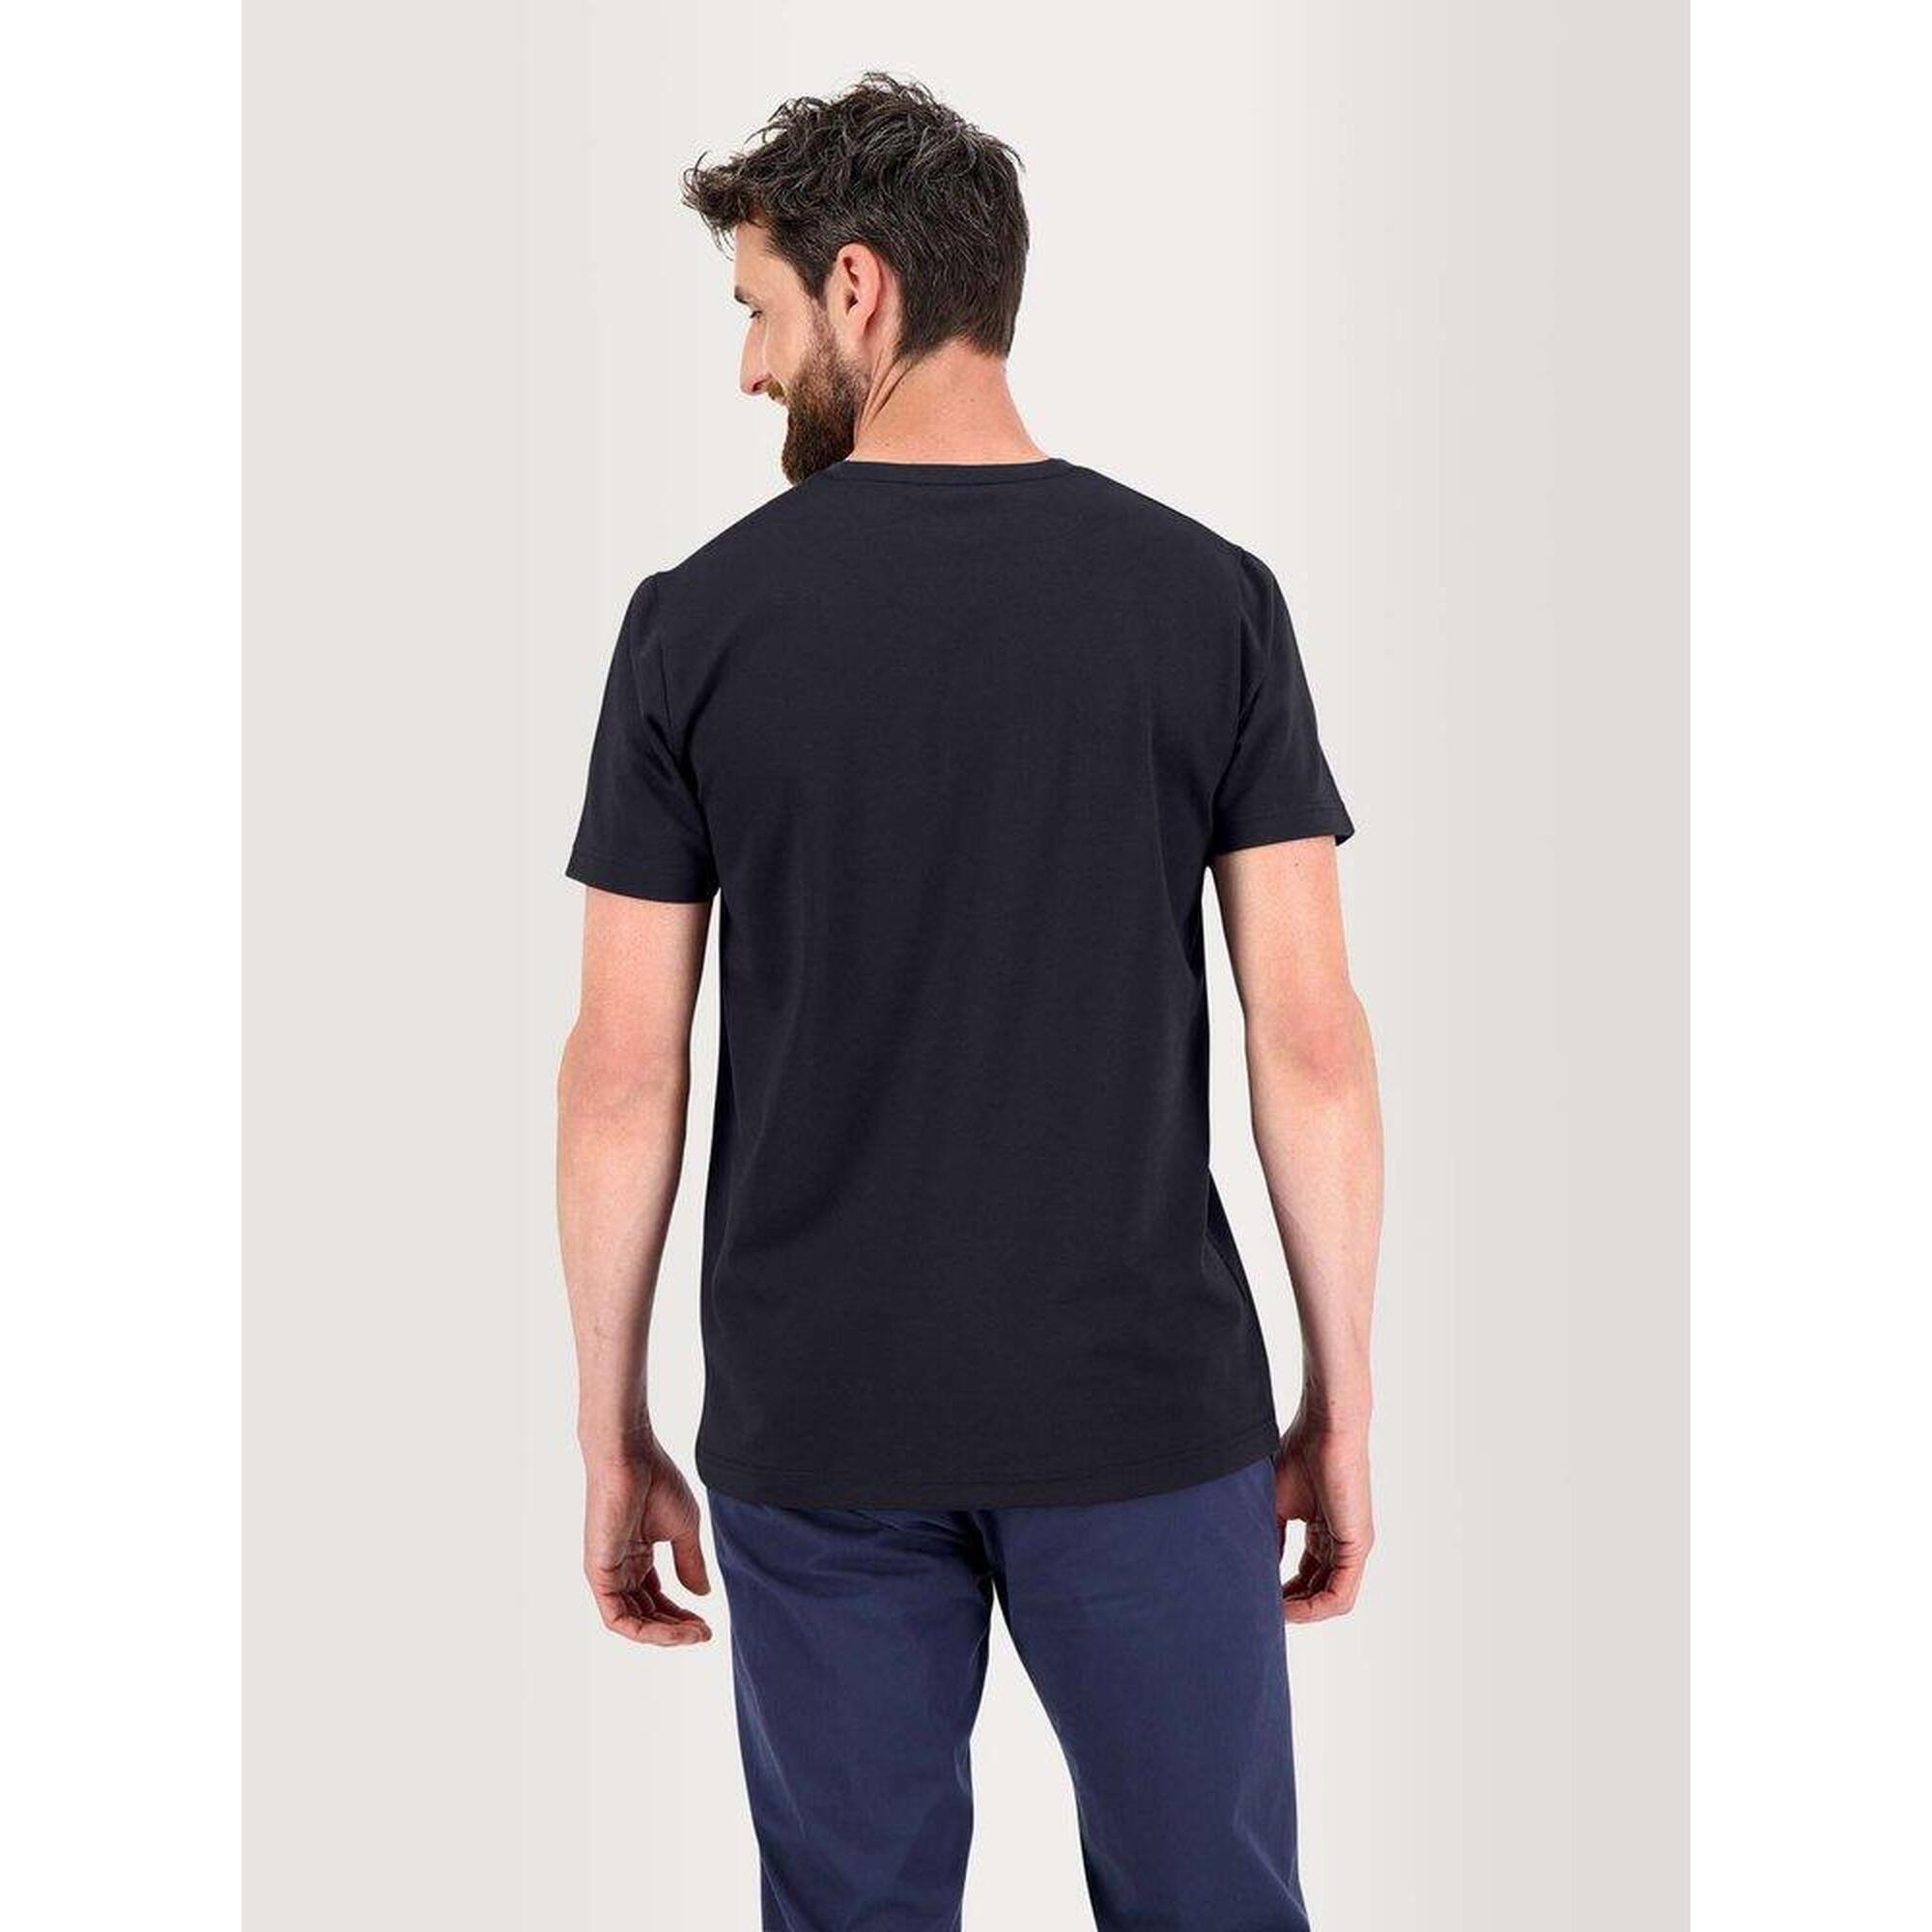 T-shirt manches courtes Homme - LABELTEE Navy